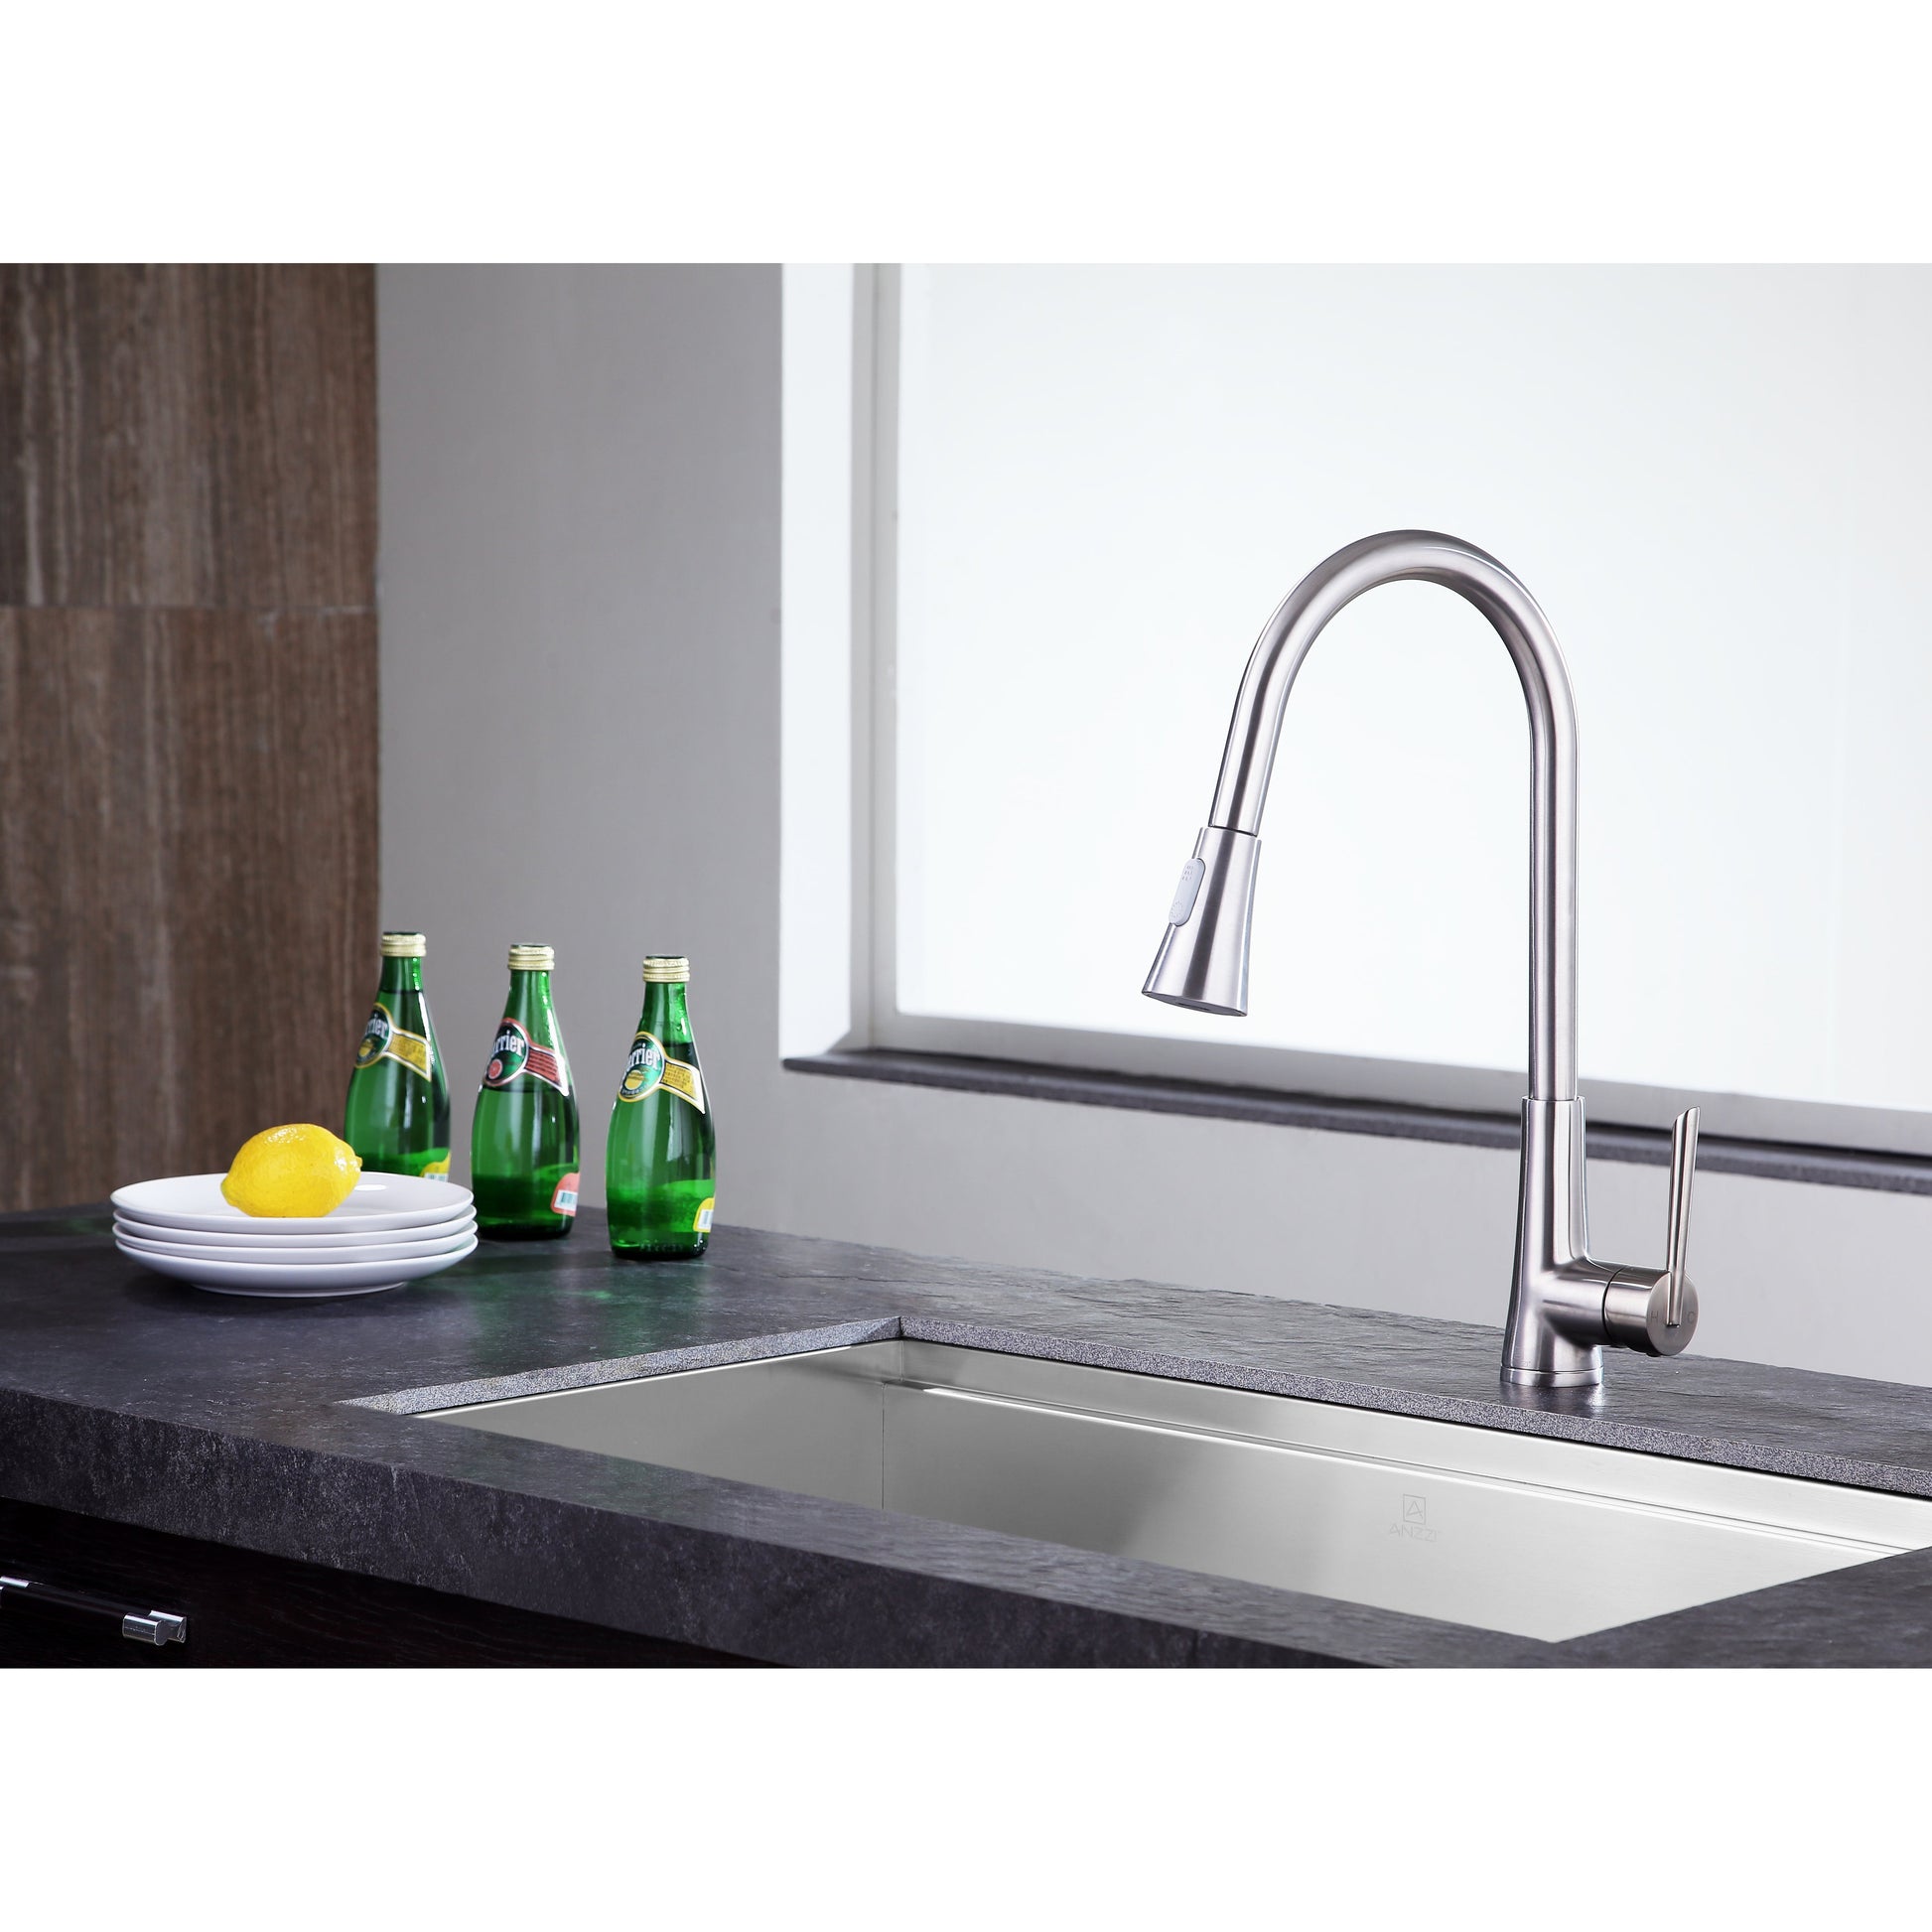 ANZZI Tulip Series Single Hole Brushed Nickel Kitchen Faucet With Euro-Grip Pull Down Sprayer